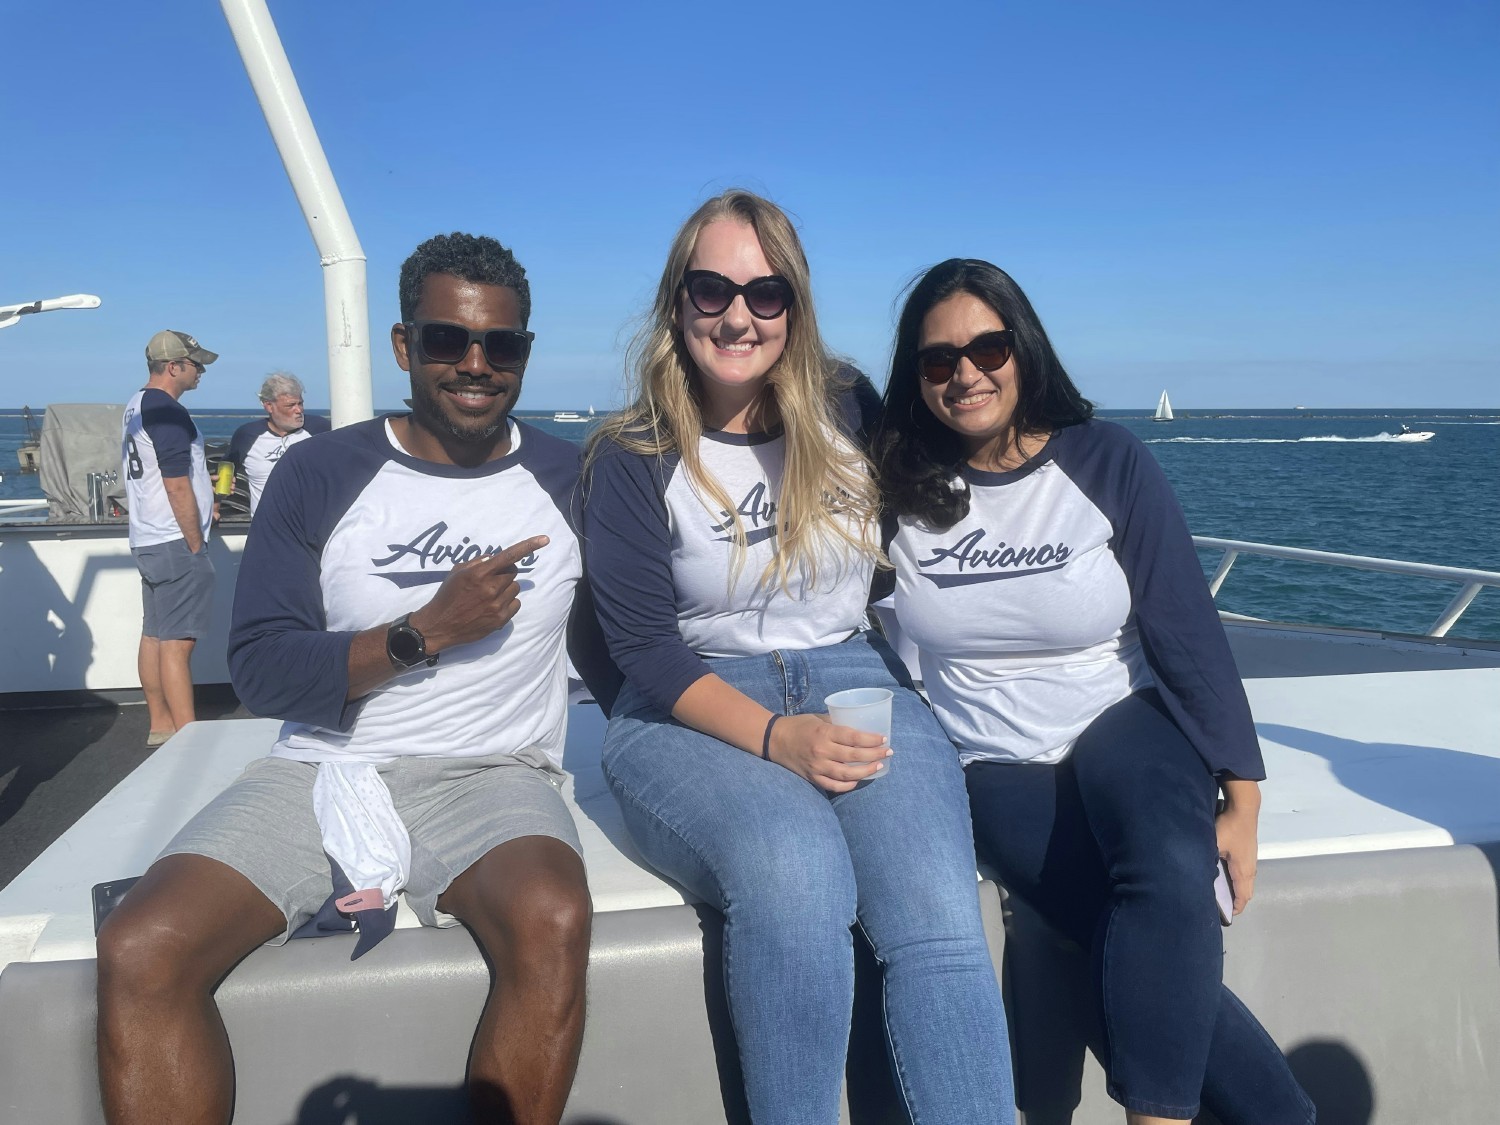 Members of Avionos' client services, delivery, and talent acquisition team enjoying an afternoon on Lake Michigan.